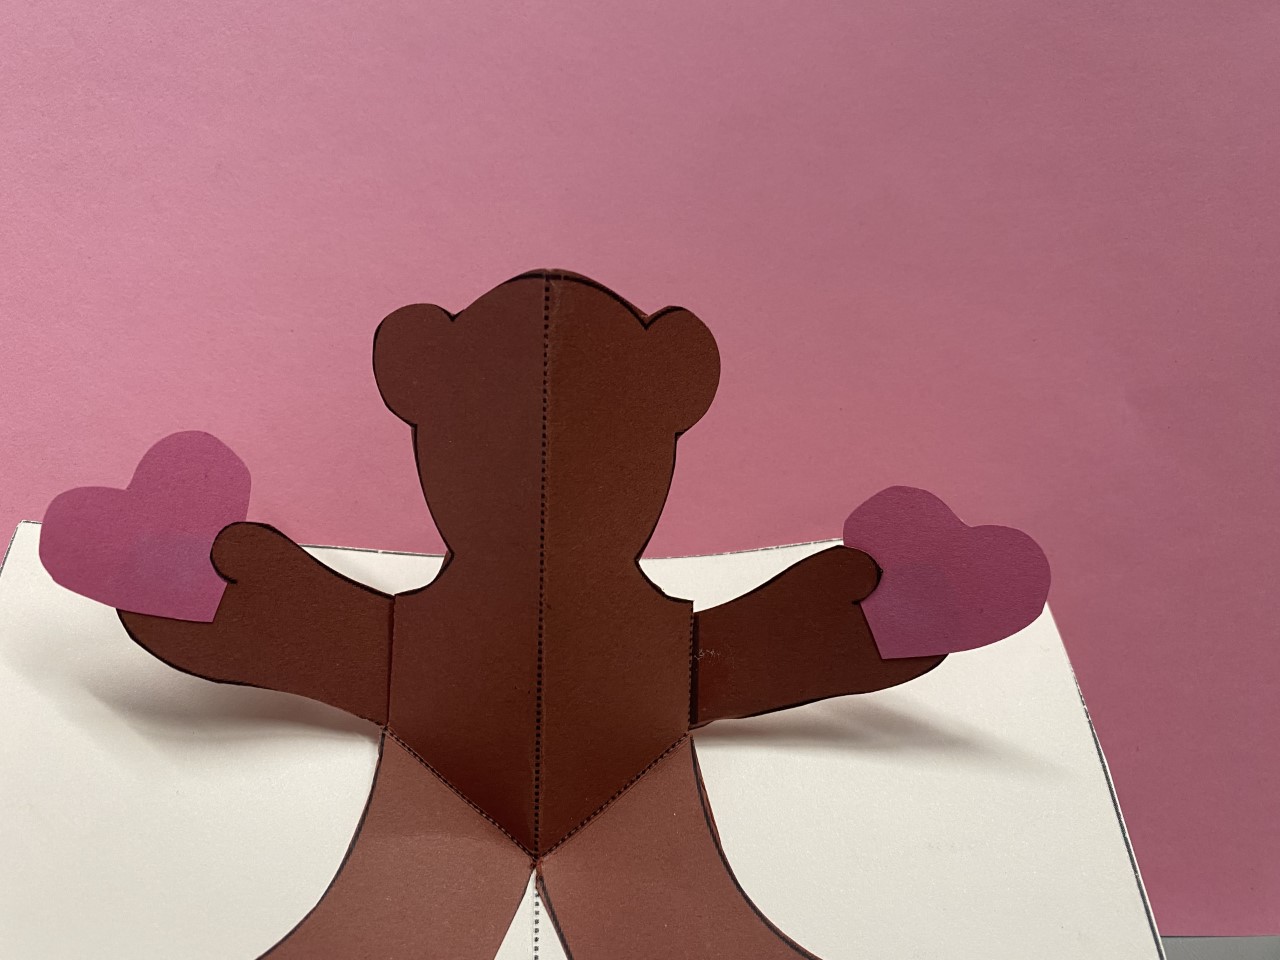 image of a pop up card of a bear holding hearts